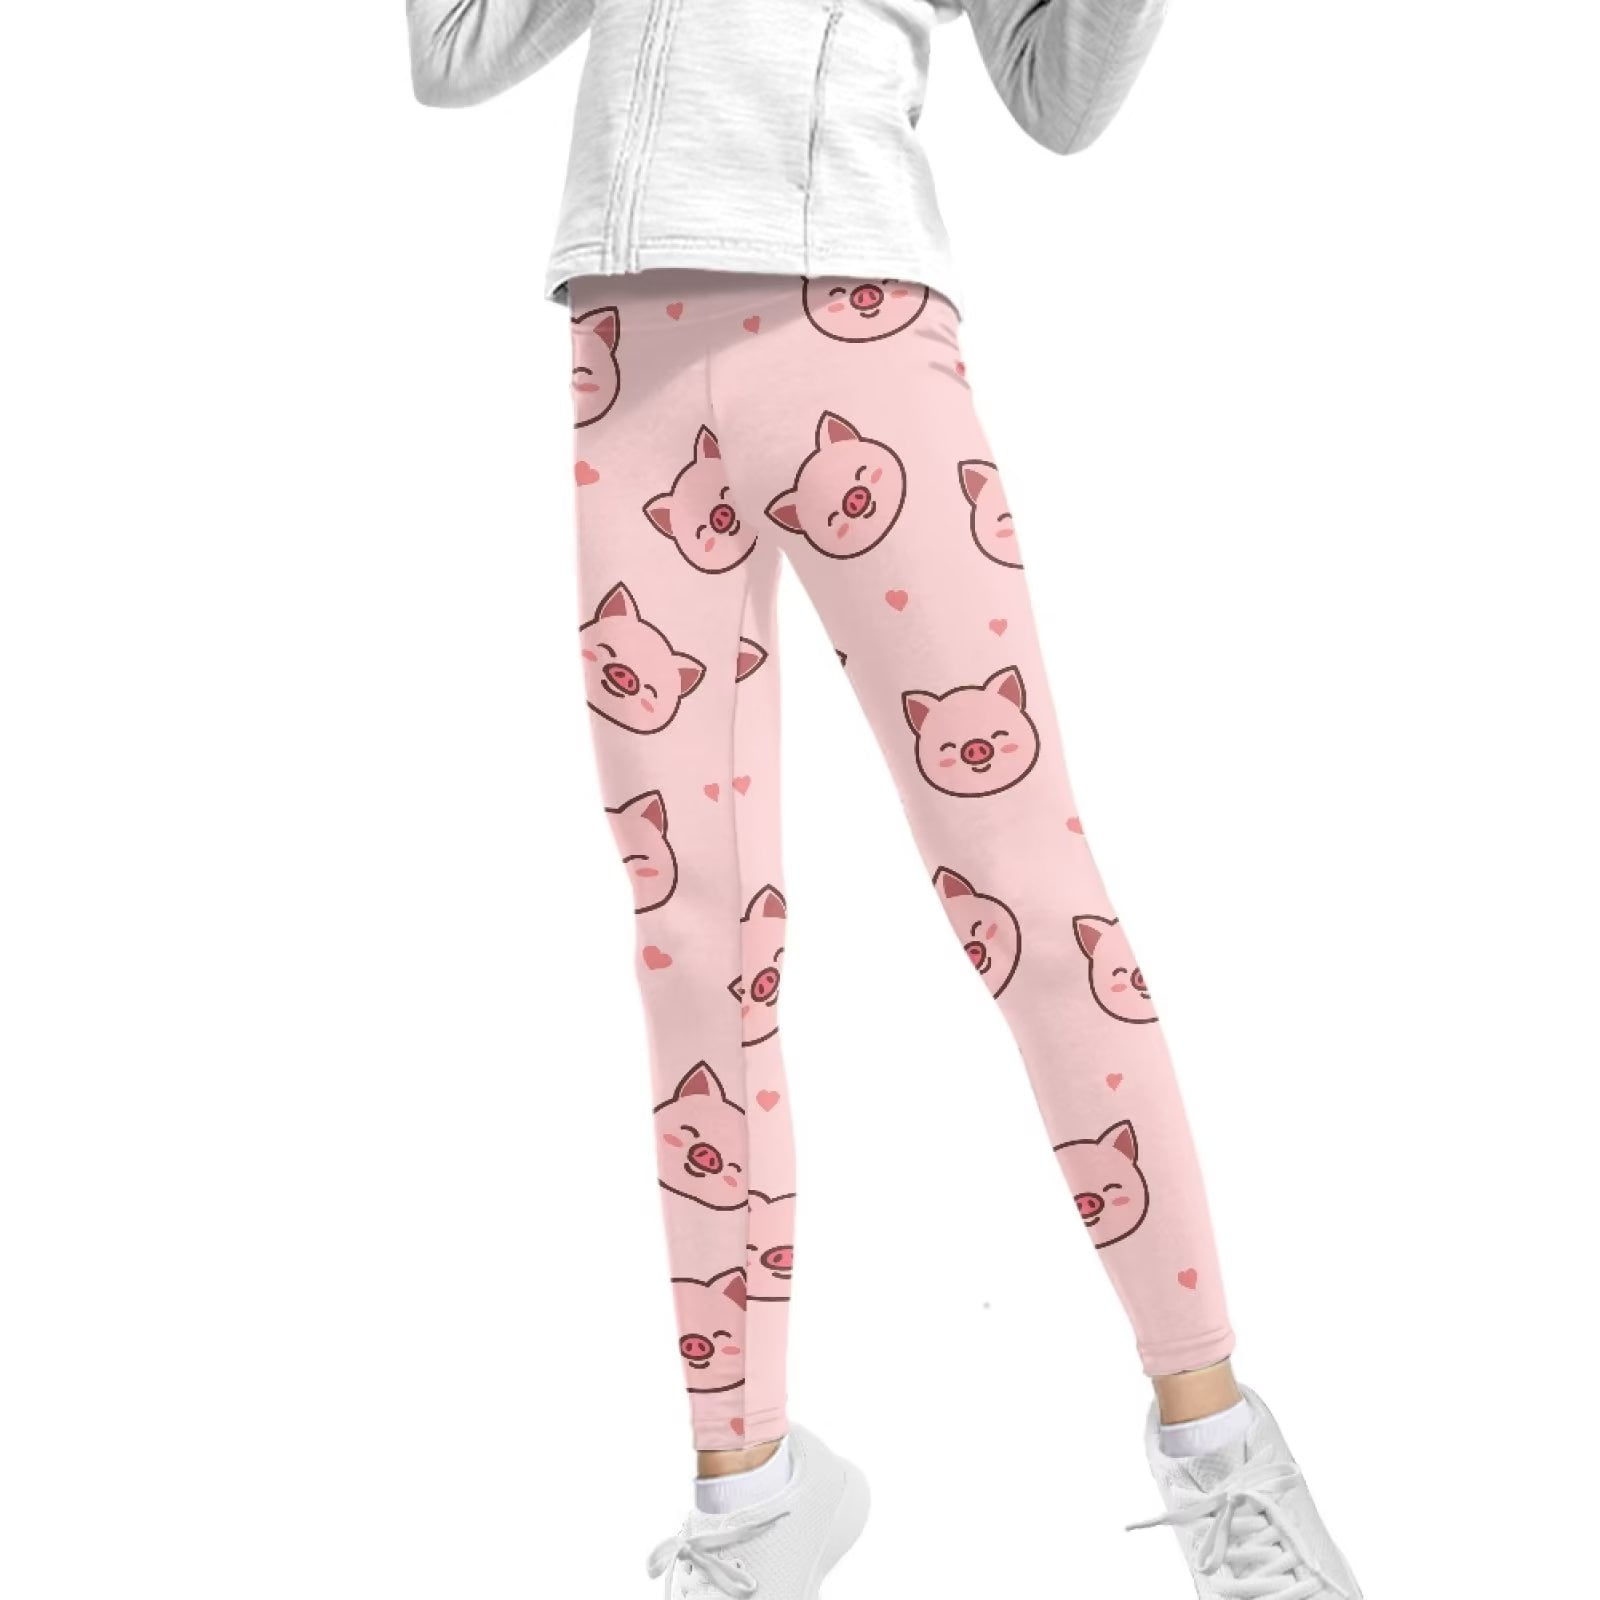 FKELYI Girls Leggings with Strawberry Size 8-9 Years Comfortable Playing  Kids Tights Pink Stretchy School Yoga Pants High Waisted Yummy Control